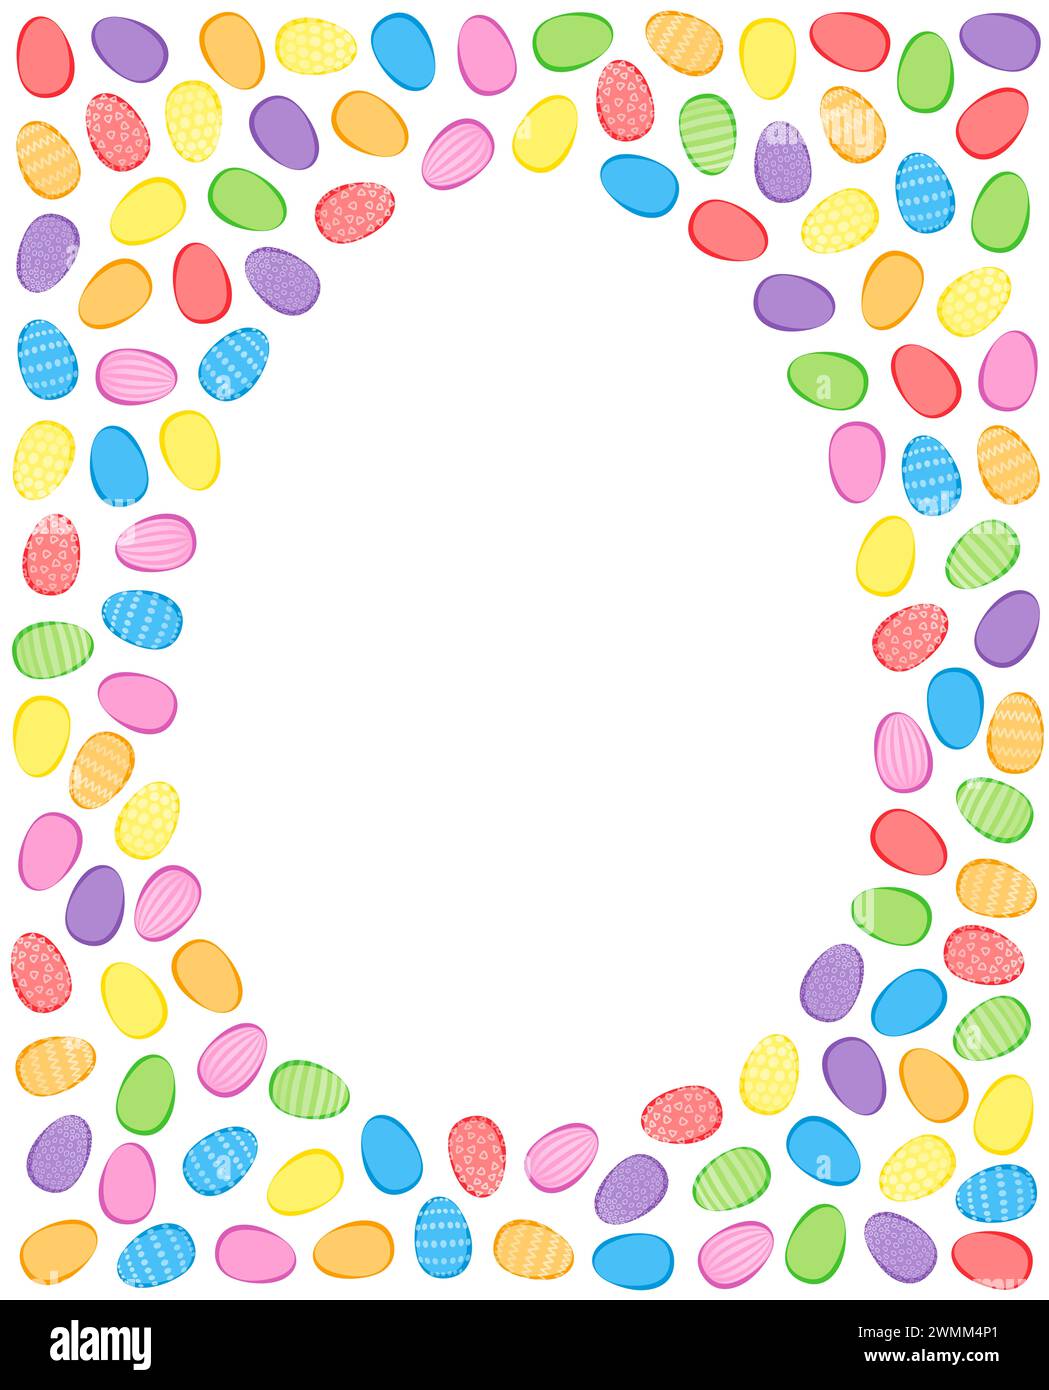 Colorful Easter egg background. Numerous easter eggs, colored and with decorative patterns, criss-cross and randomly arranged around empty egg shape. Stock Photo